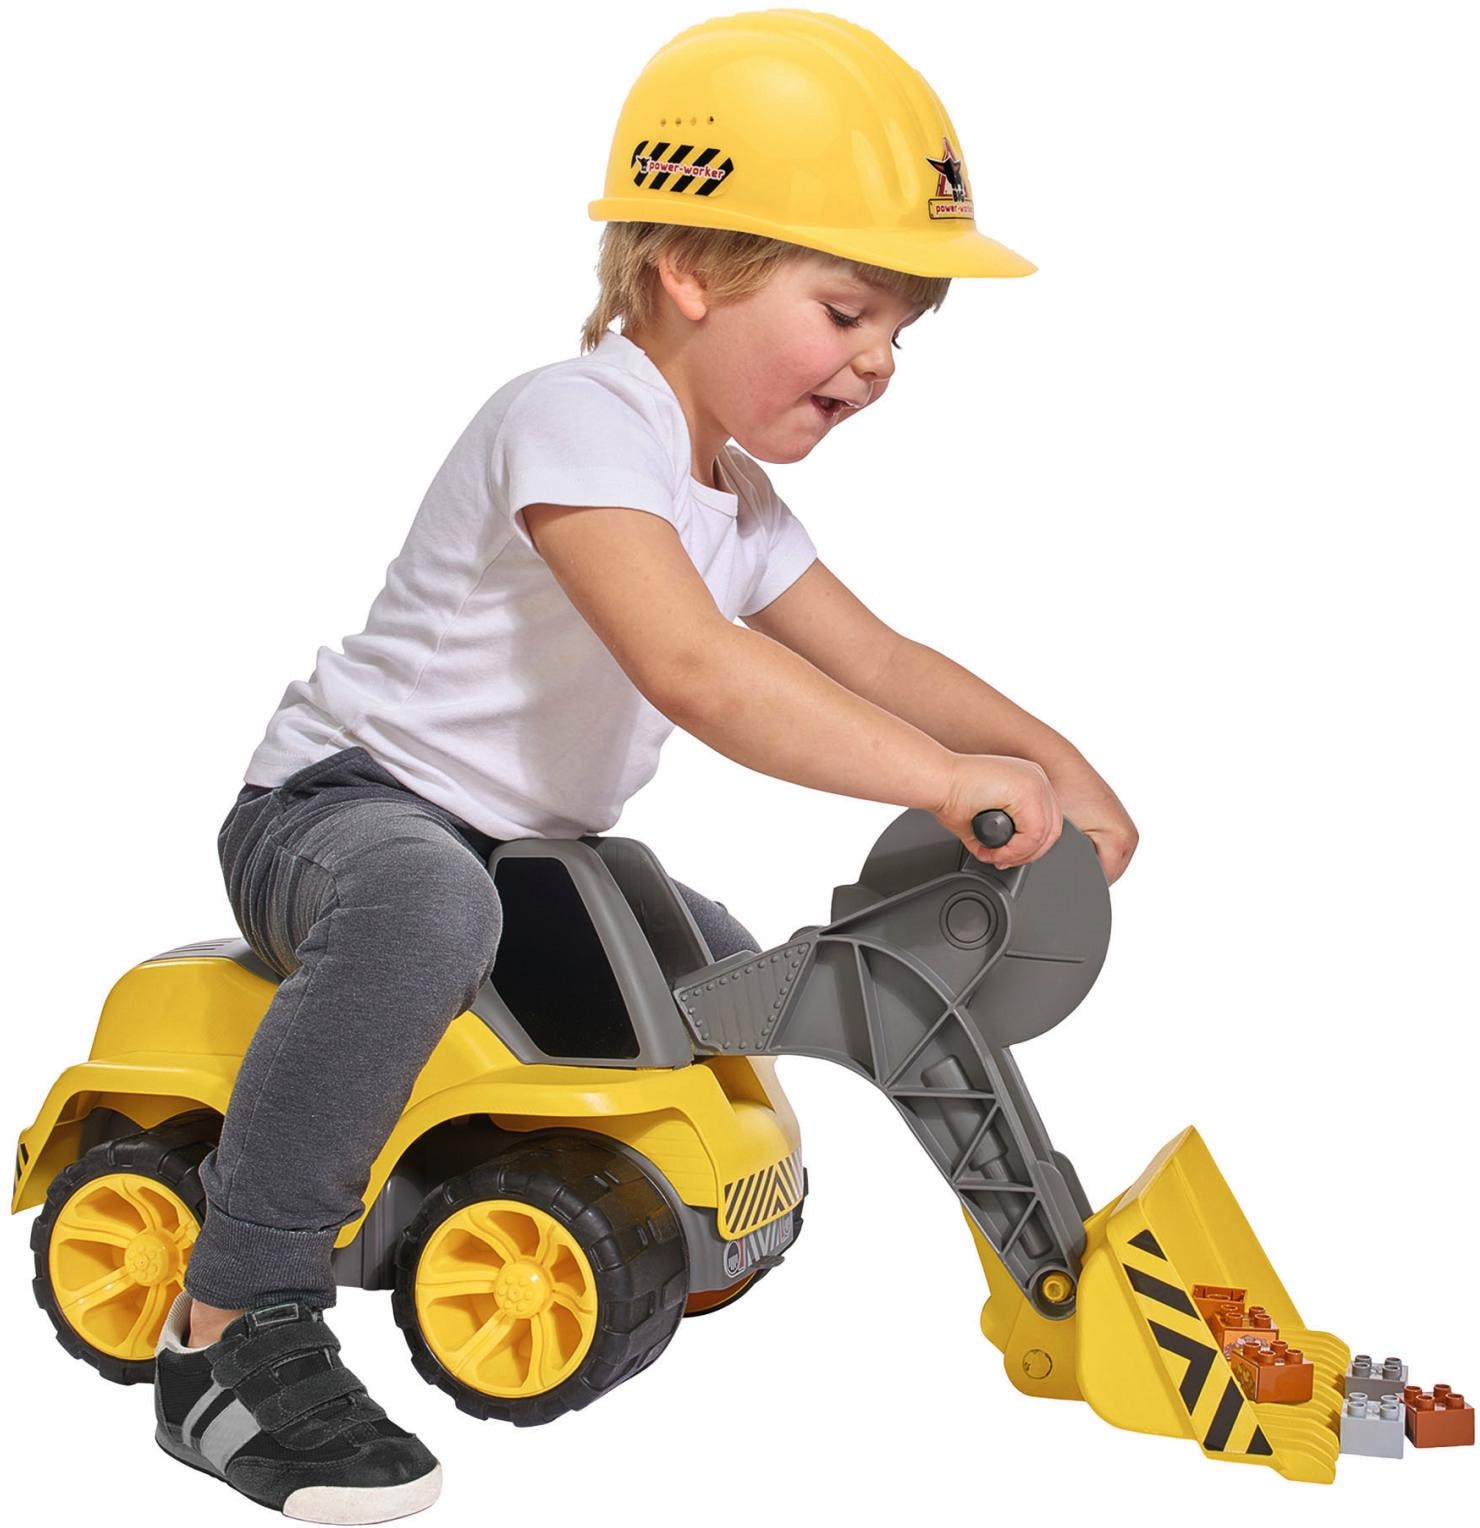 Spielzeug-Bagger »BIG Power Worker Maxi Loader«, Made in Germany